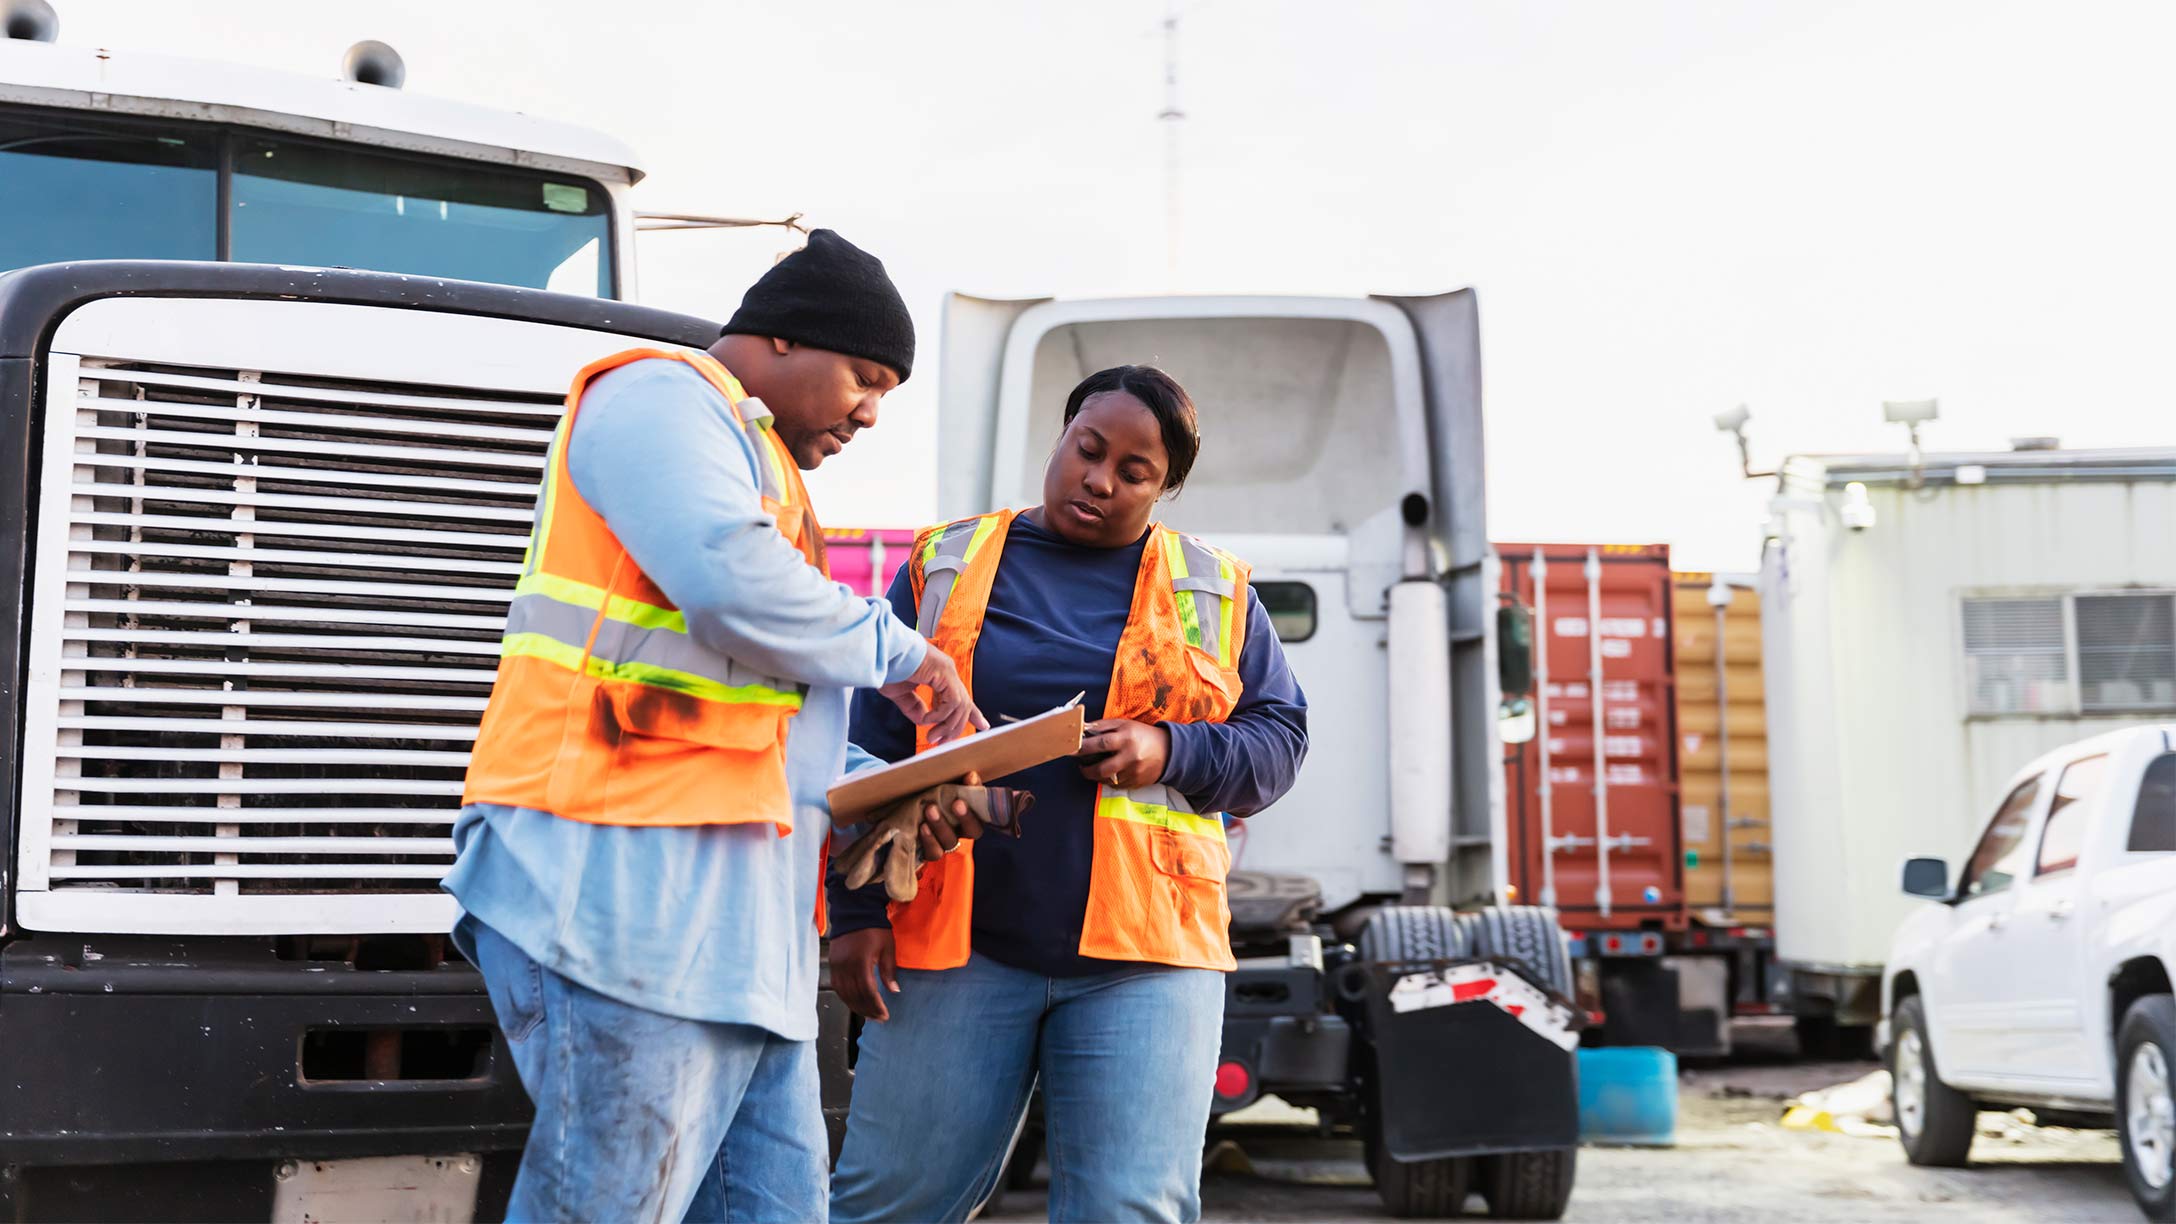 A man and a woman in work wear standing in front of a truck looking at some documents.